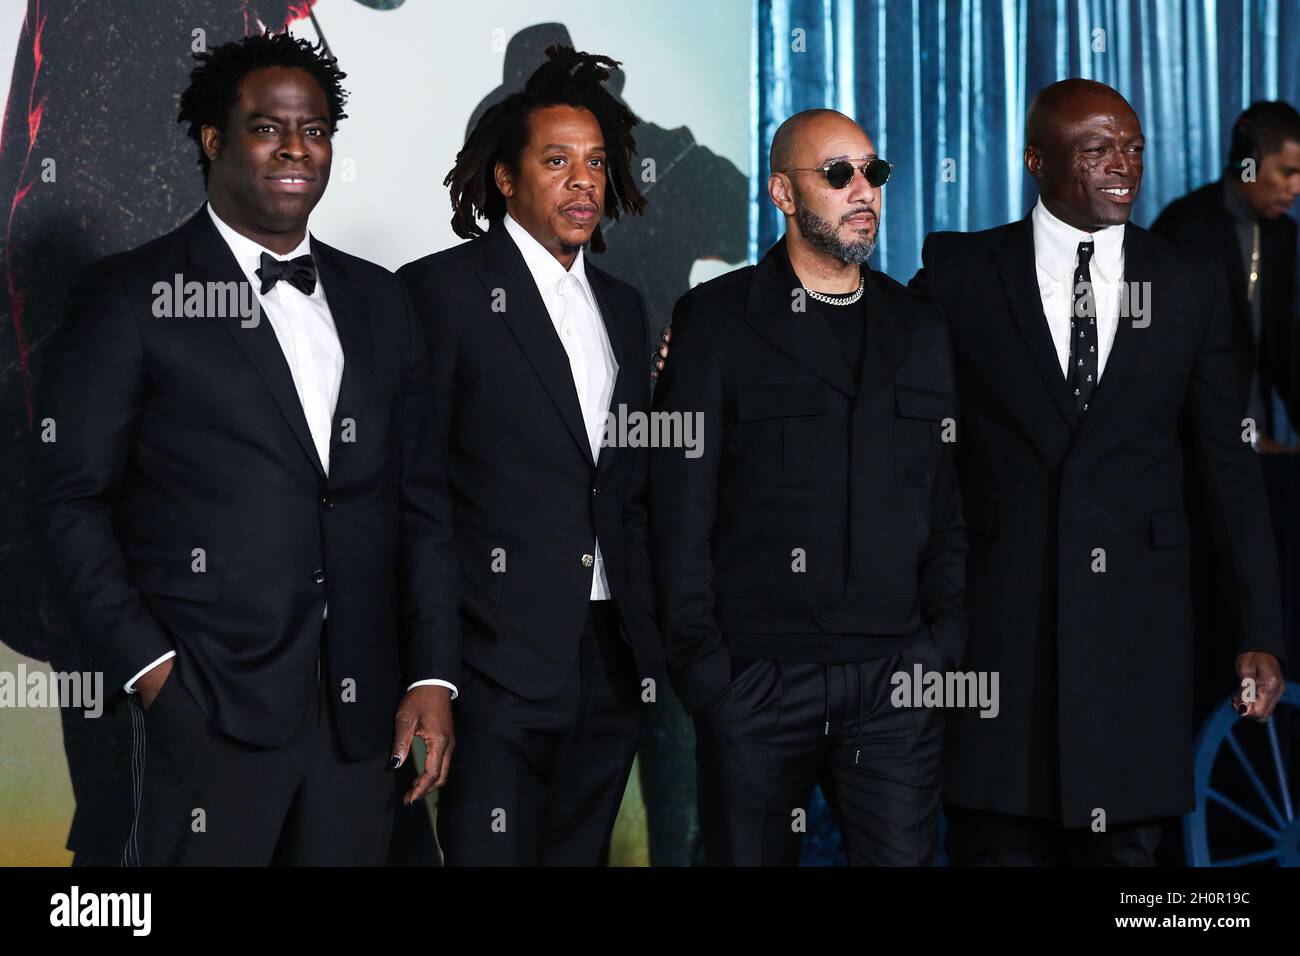 LOS ANGELES, CALIFORNIA, USA - OCTOBER 13: Director Jeymes Samuel, rapper/producer Jay-Z (Shawn Corey Carter), record producer Swizz Beatz (Kasseem Daoud Dean) and singer-songwriter Seal (Henry Olusegun Adeola Samuel) arrive at the Los Angeles Premiere Of Netflix's 'The Harder They Fall' held at the Shrine Auditorium and Expo Hall on October 13, 2021 in Los Angeles, California, United States. (Photo by Xavier Collin/Image Press Agency) Stock Photo